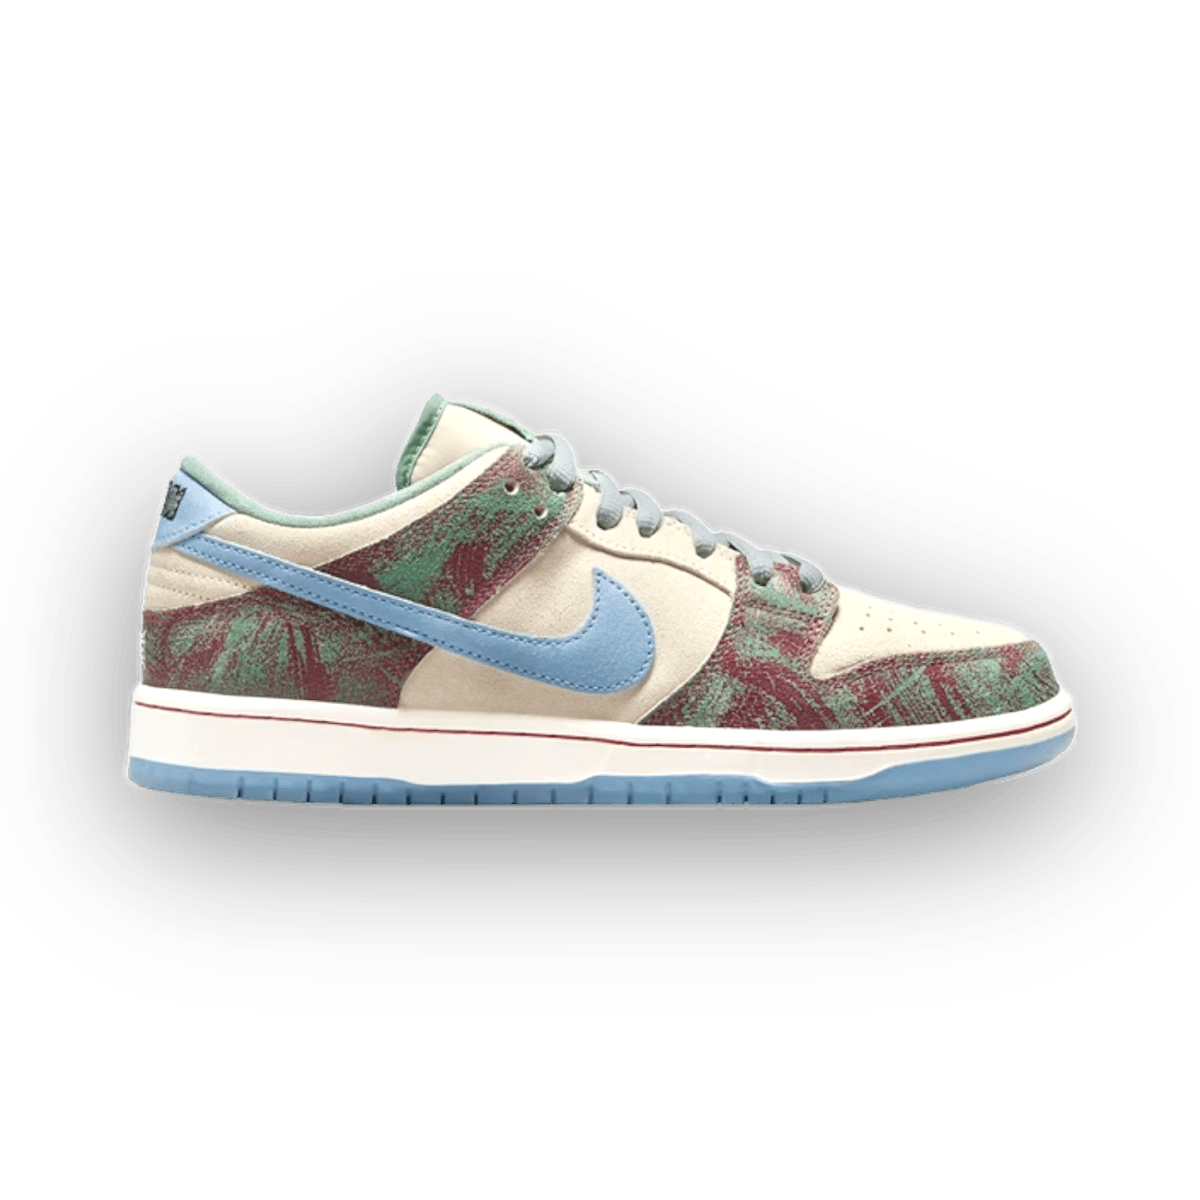 SB Dunk Low Crenshaw Skate Club - Low Sneaker - Dunks - Jawns on Fire - sneakers